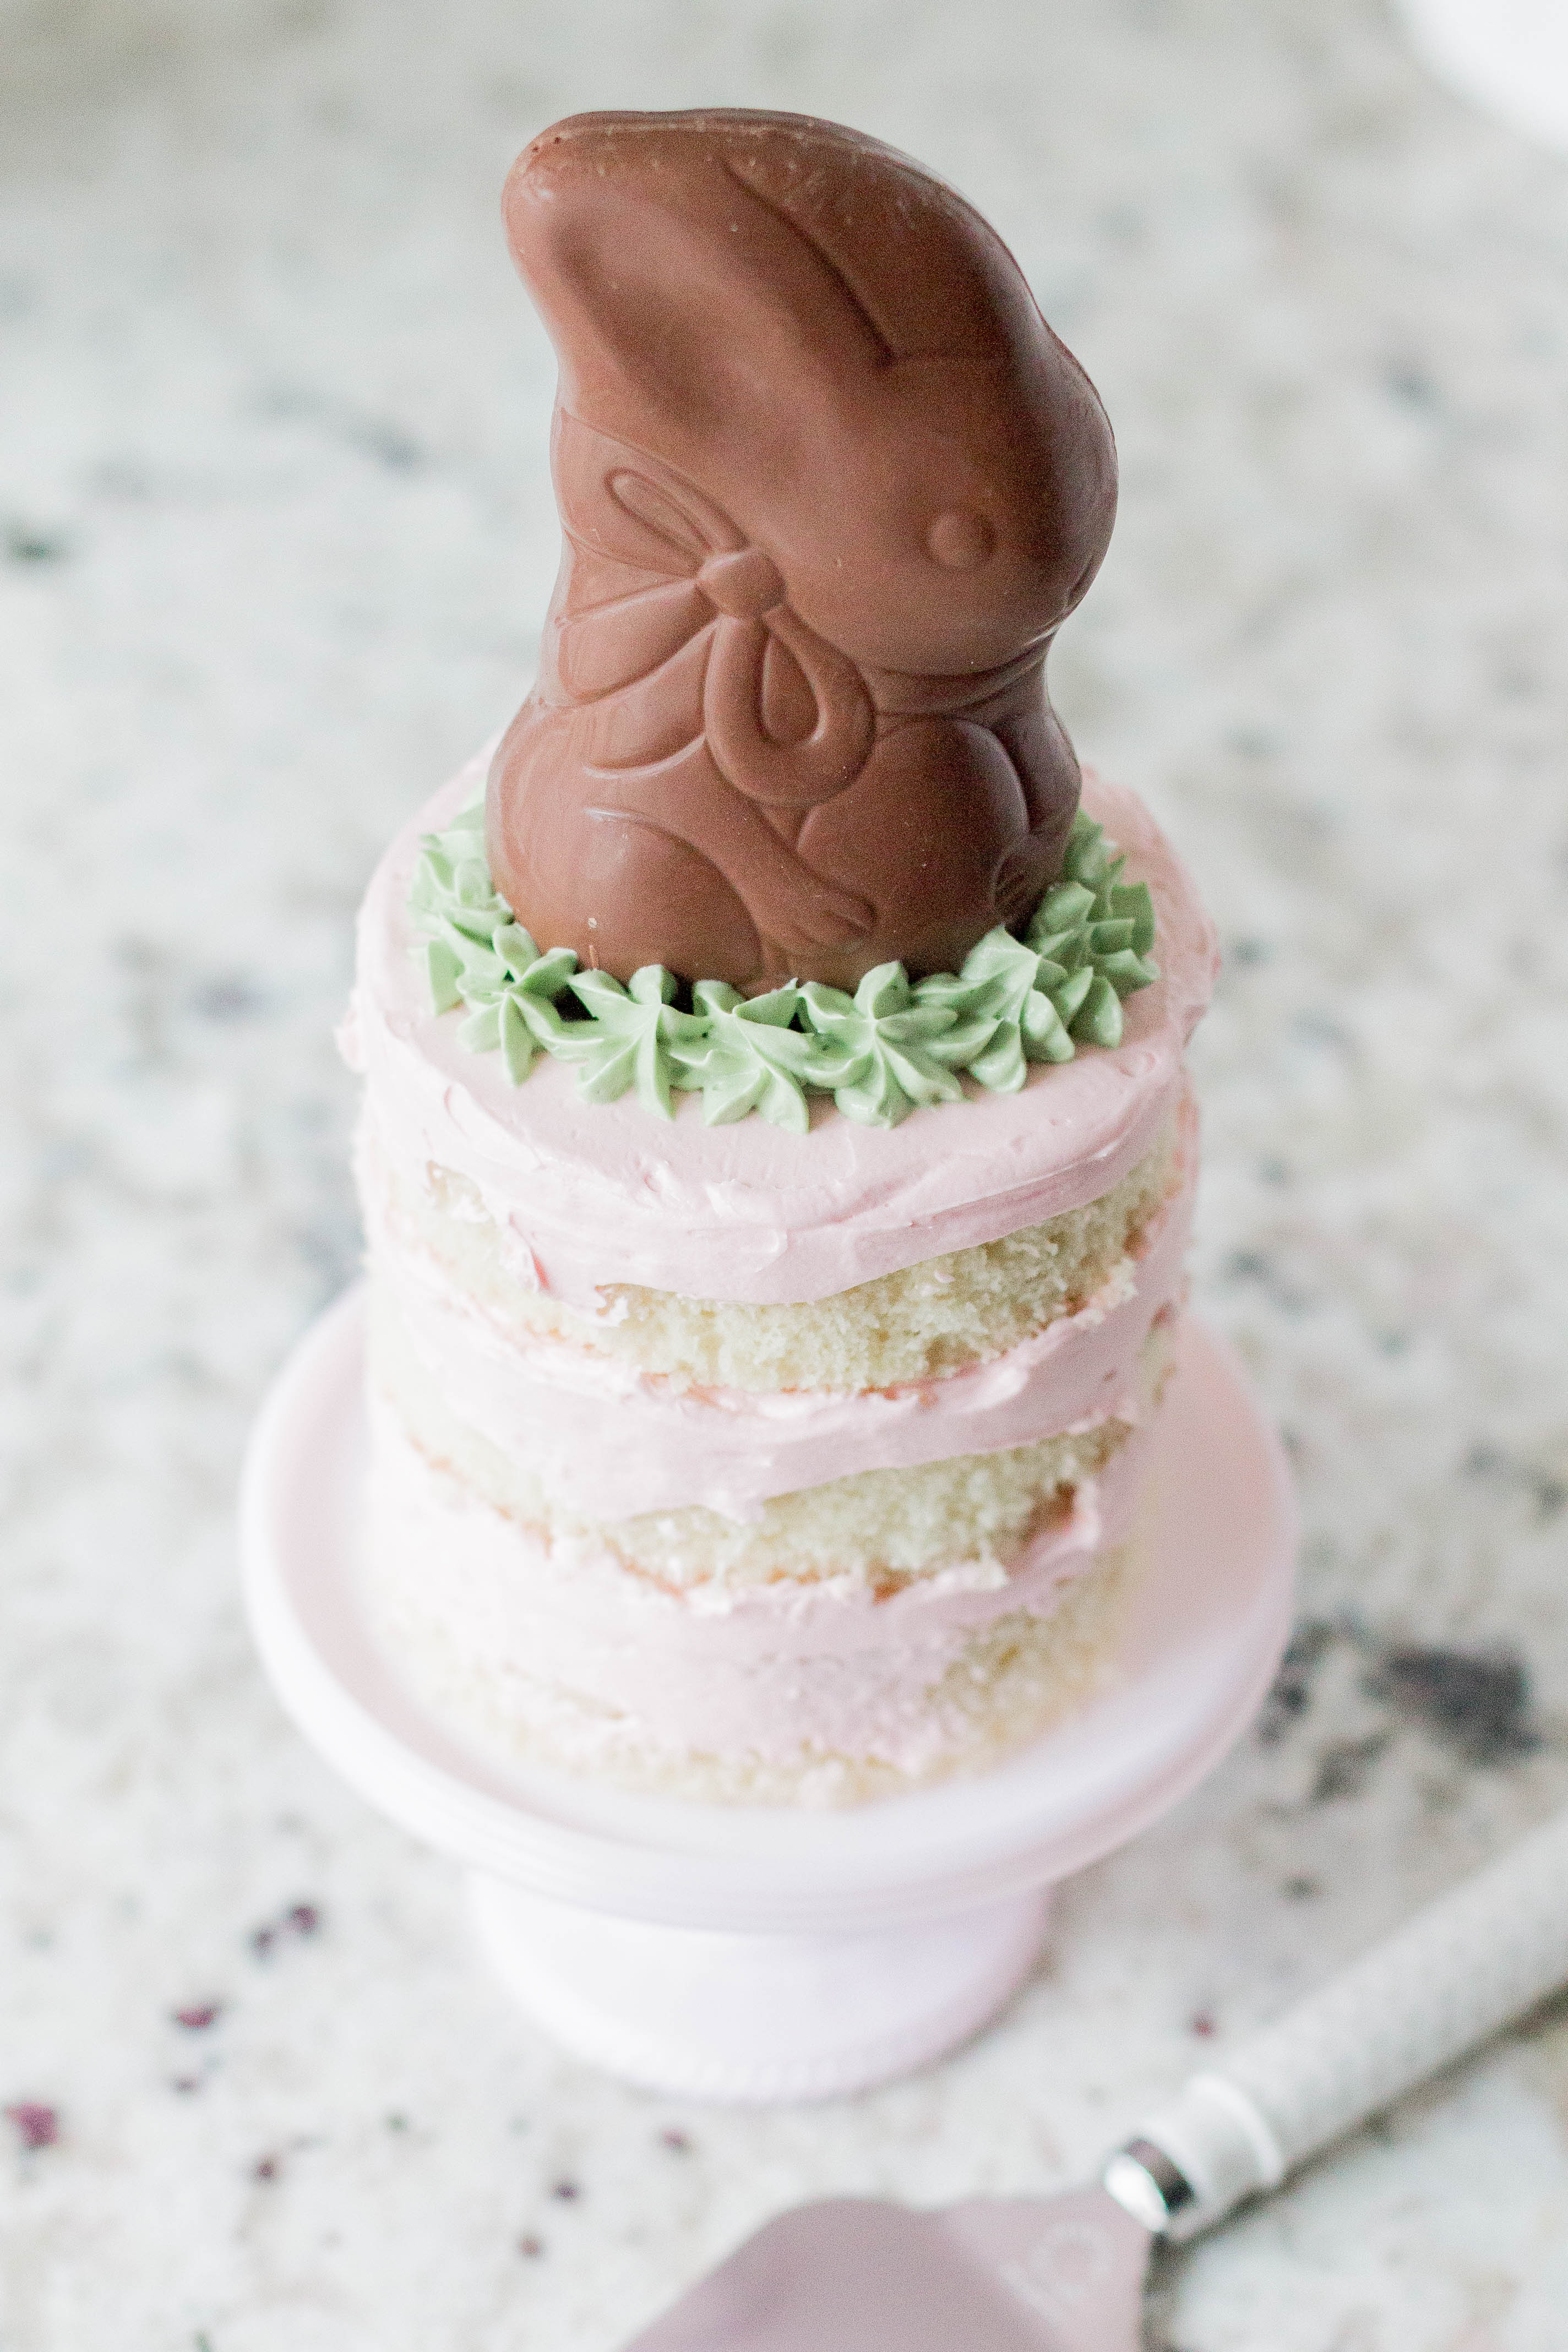 Strawberry Almond Layered Easter Cake